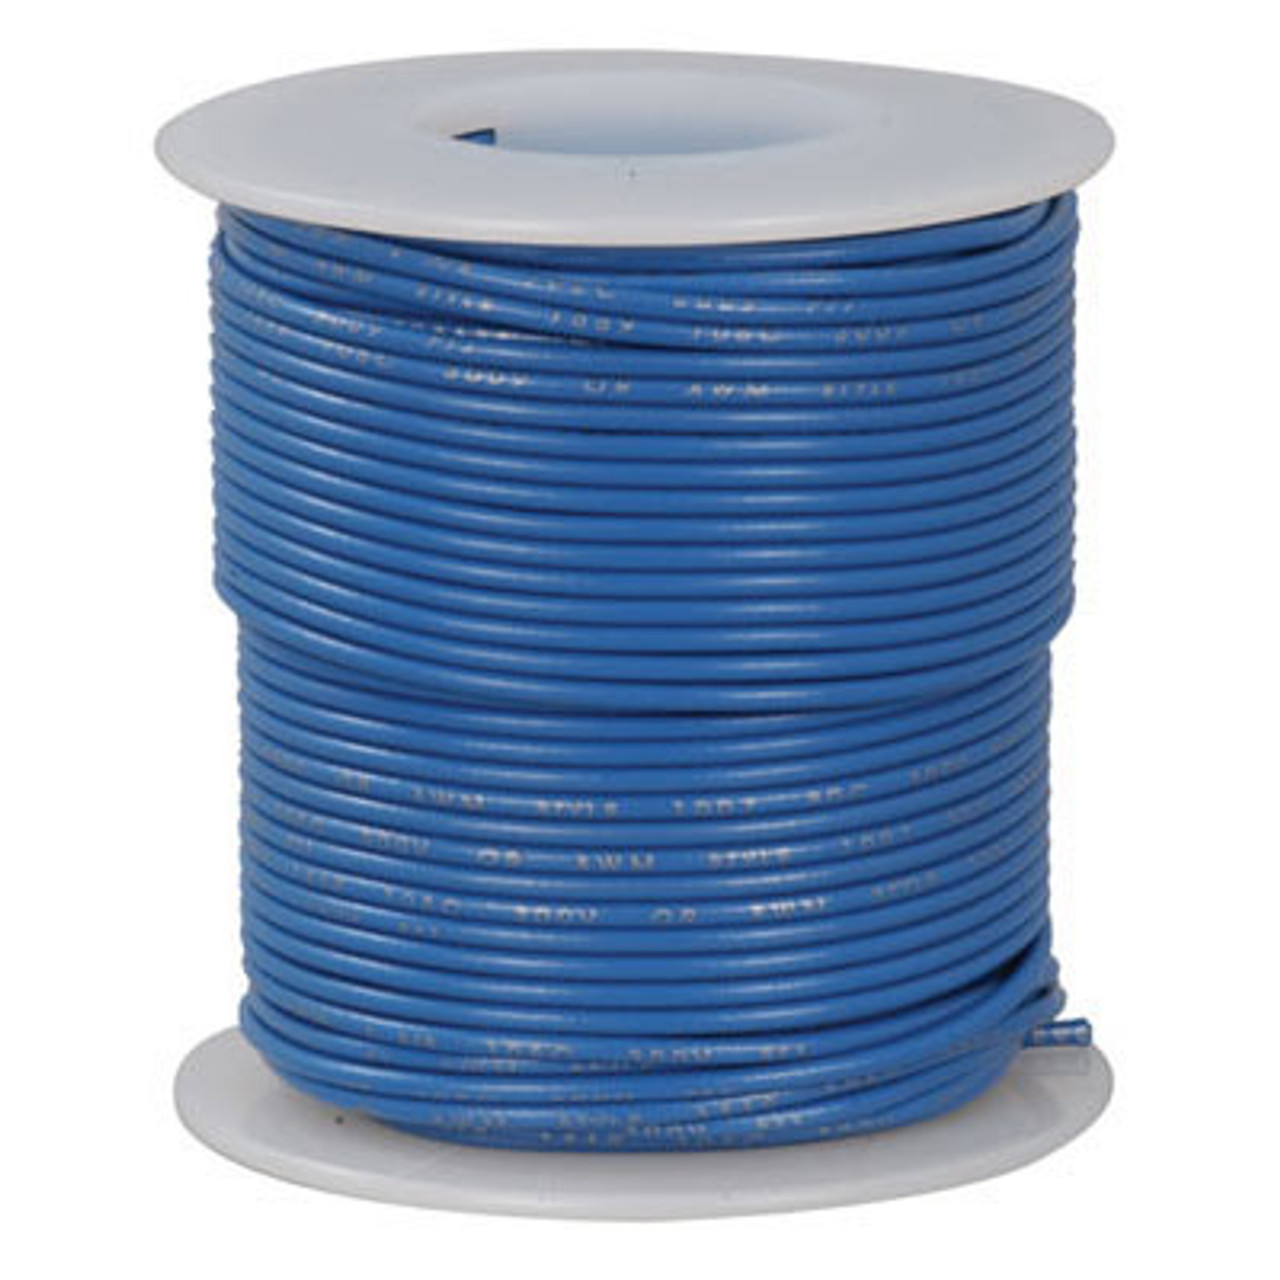 https://cdn11.bigcommerce.com/s-nnahwwwhci/images/stencil/1280x1280/products/15927/18368/blue-100-foot-18-awg-stranded-hook-up-wire-41__95936.1663599392.jpg?c=1